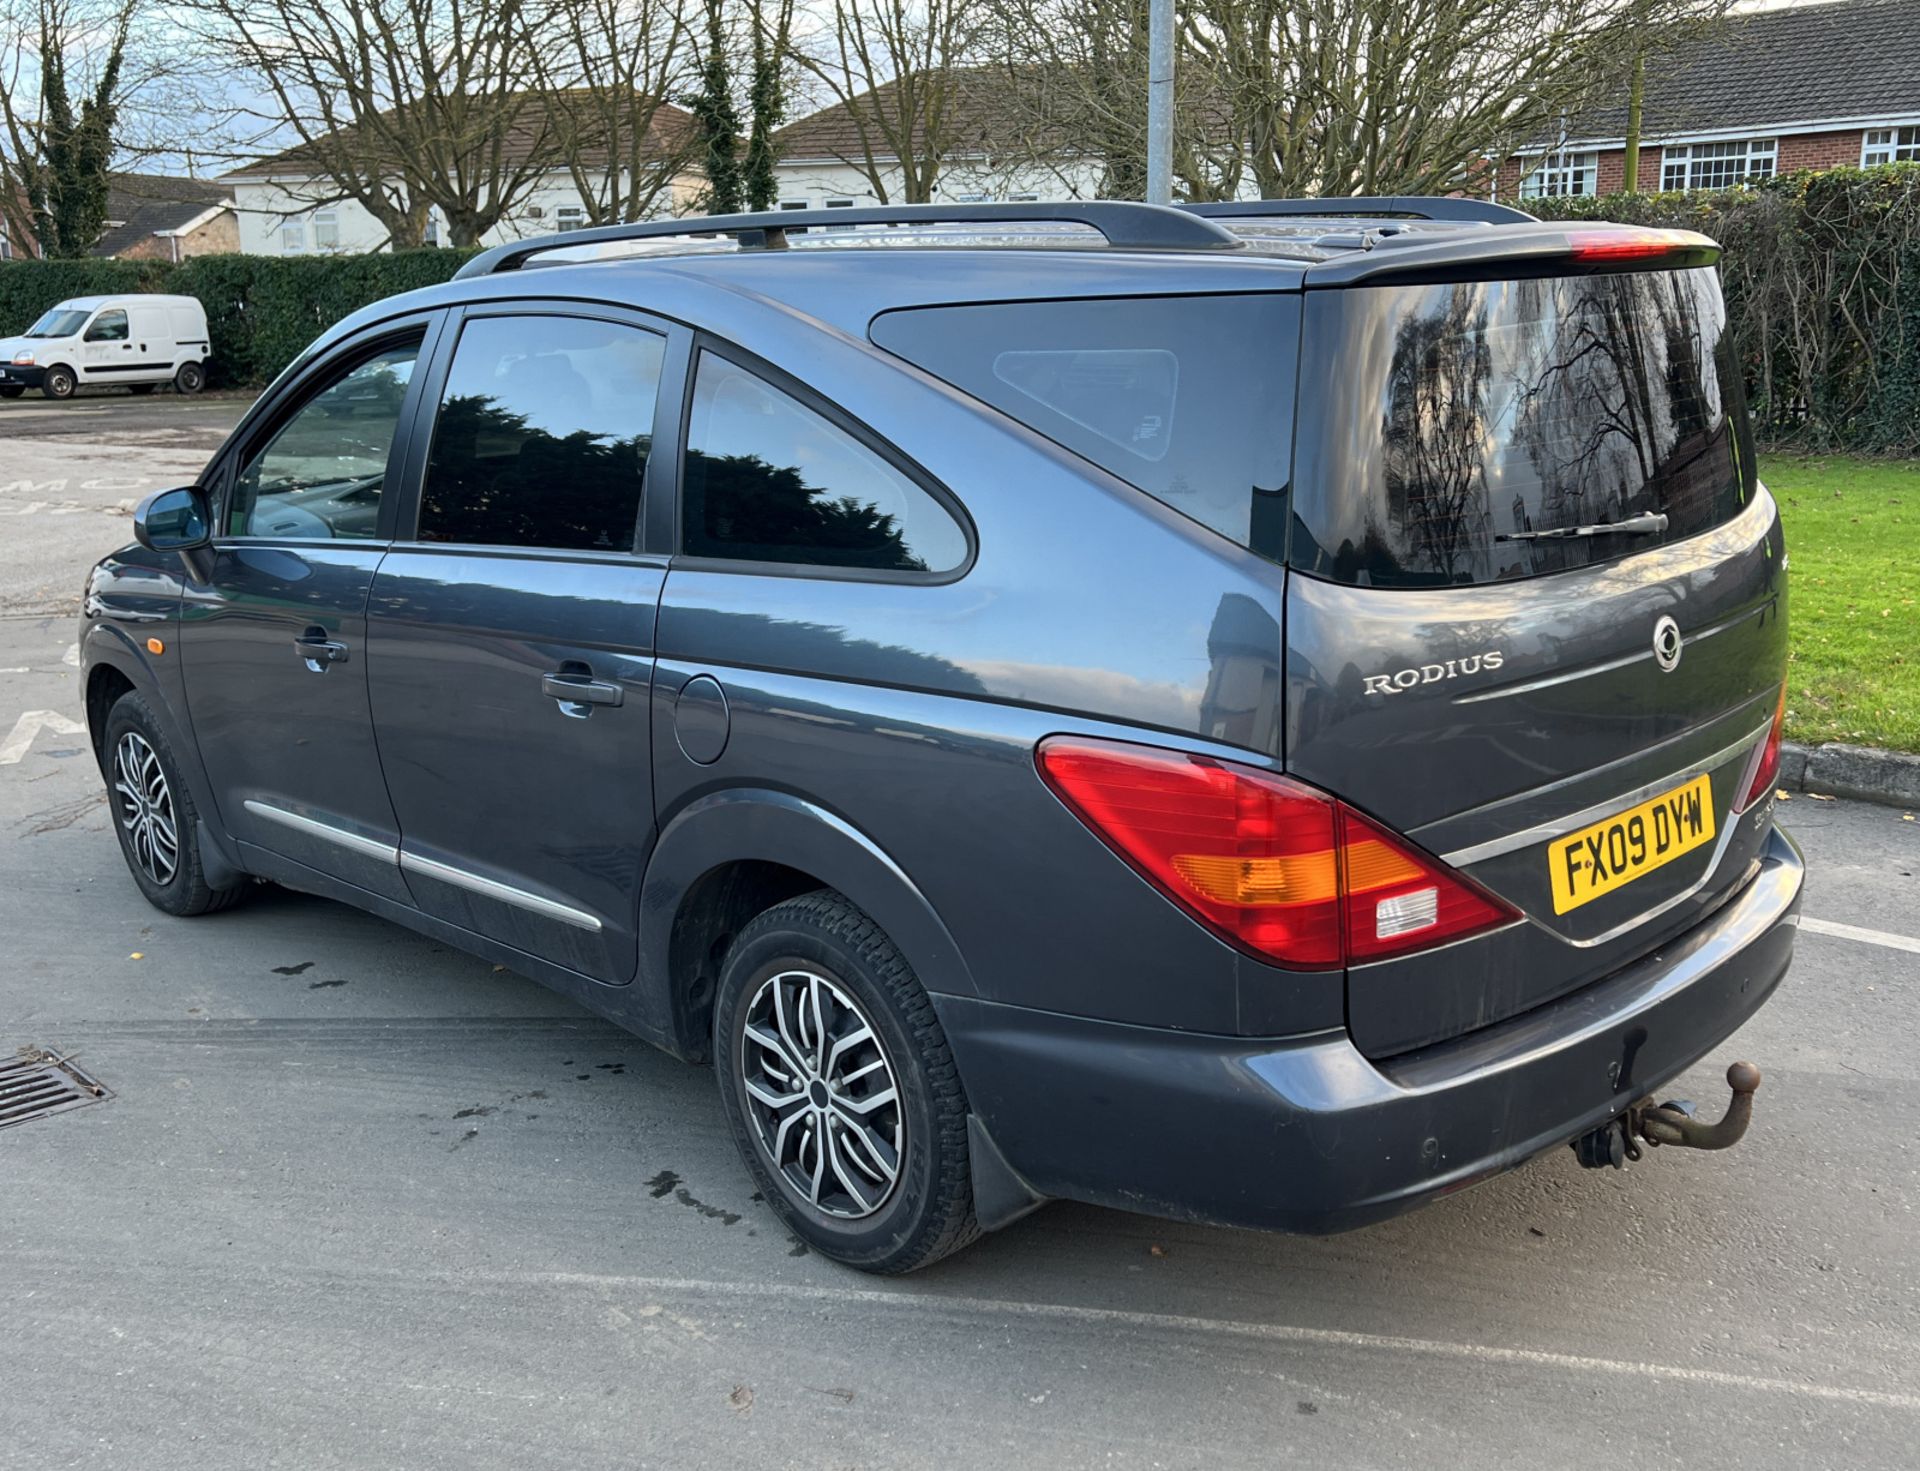 Ssangyong Rodius - 7 seater - 2.7L Mercedes engine - Please see description - Image 7 of 33